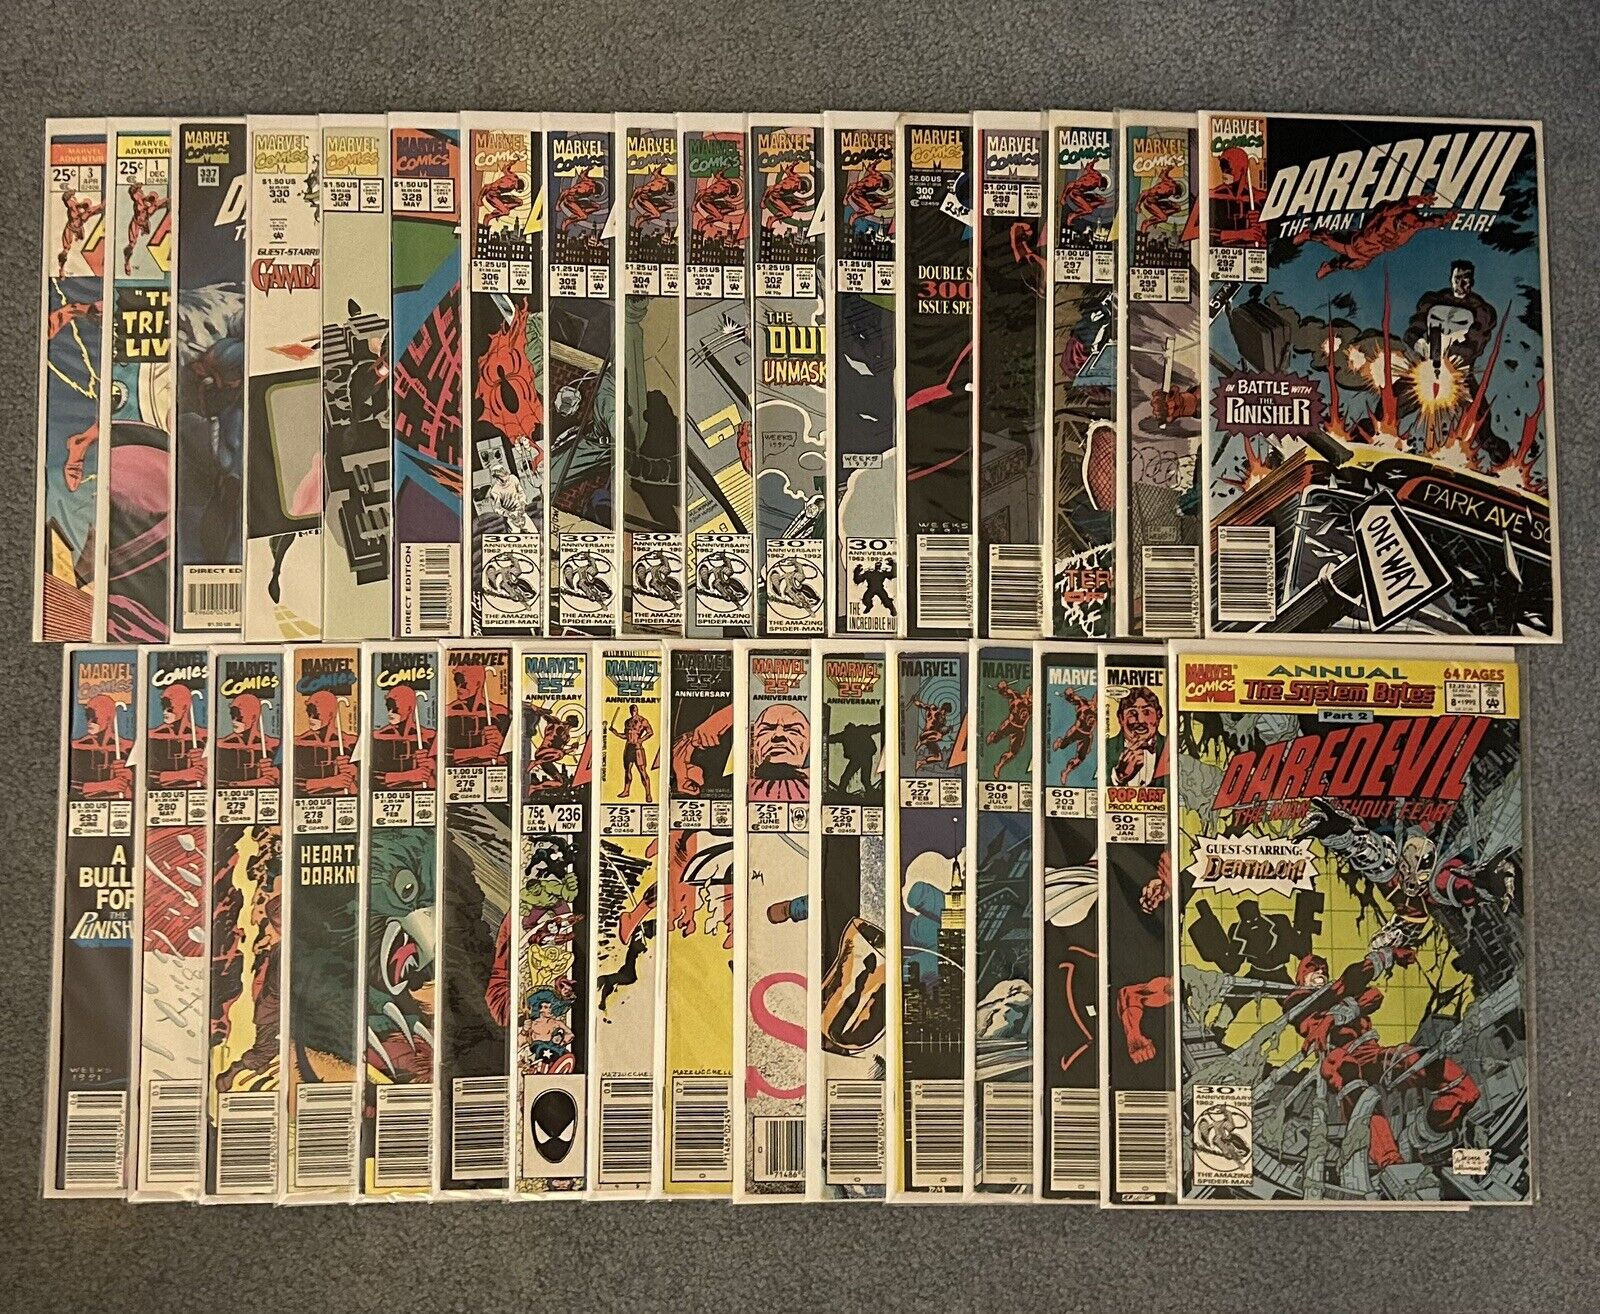 Daredevil Comic Book Lot 33 Issues Total. Featuring Characters Punisher & X-Men